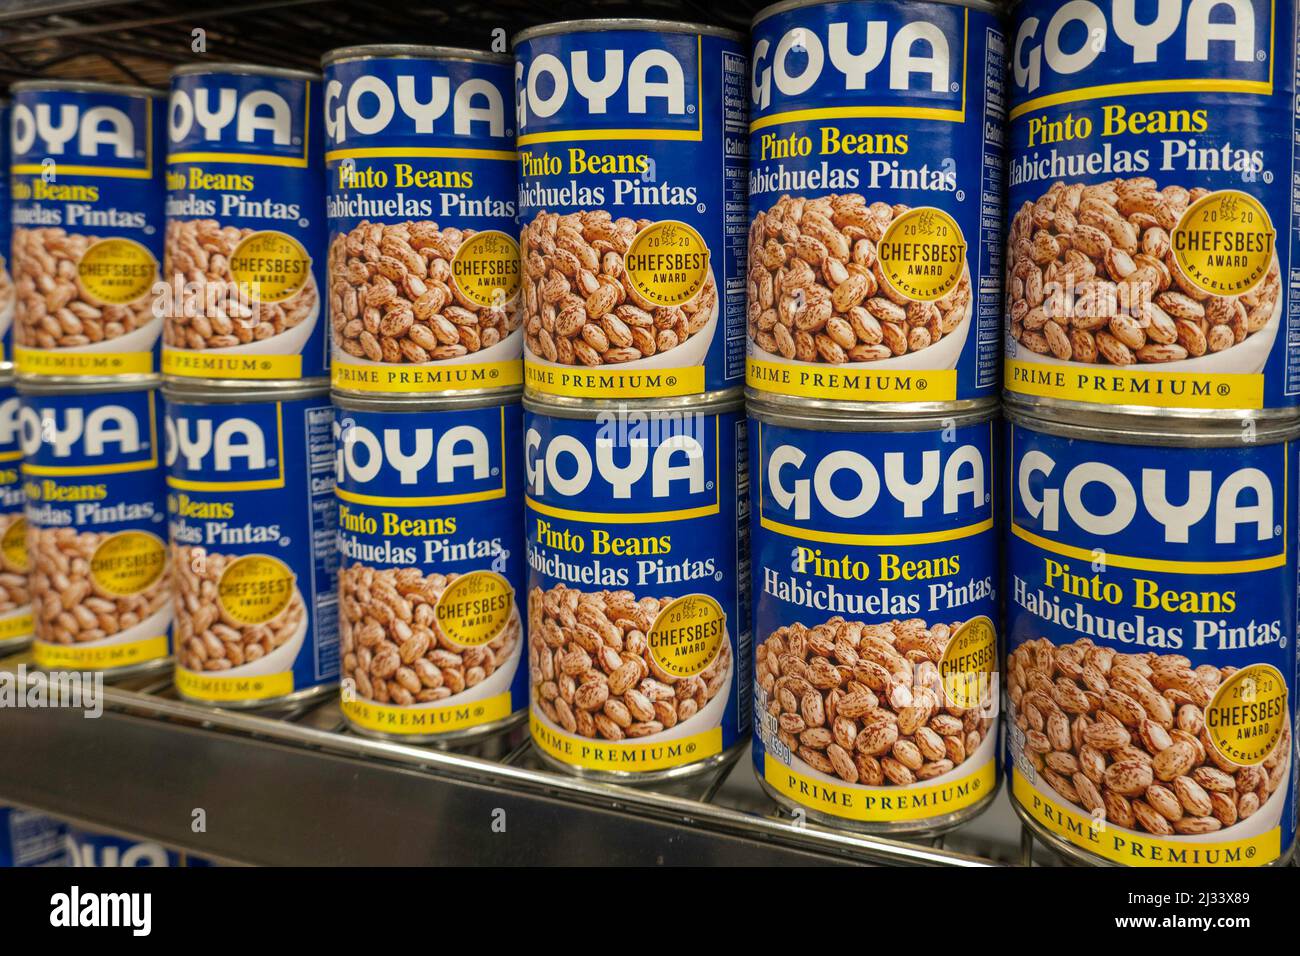 Goya brand pinto beans at D'Agostino Grocery Store in New York City, United States  2022 Stock Photo